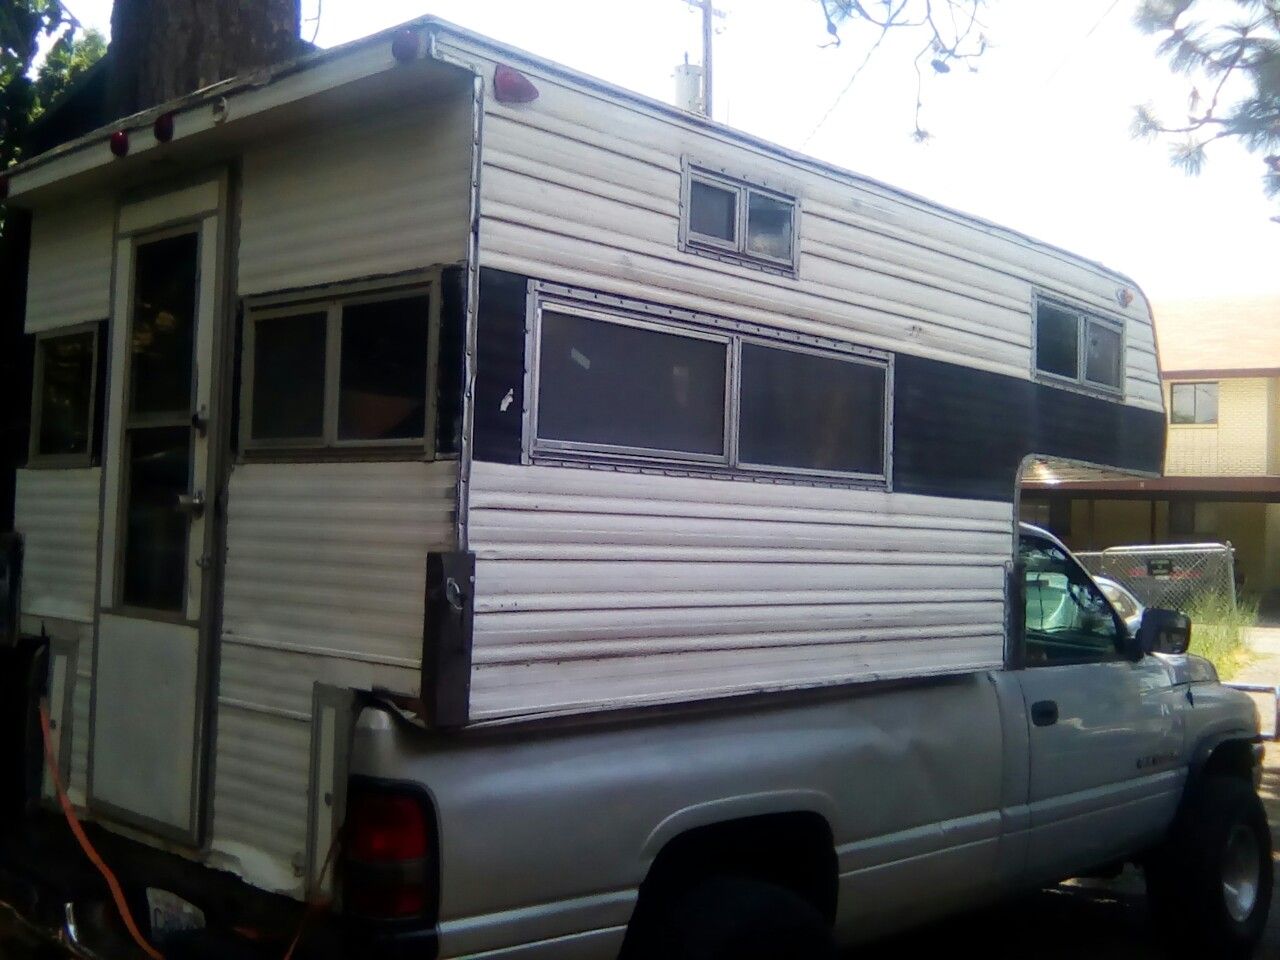 ITS A FIXEY OLD IE BUT GOODIE CAMPER